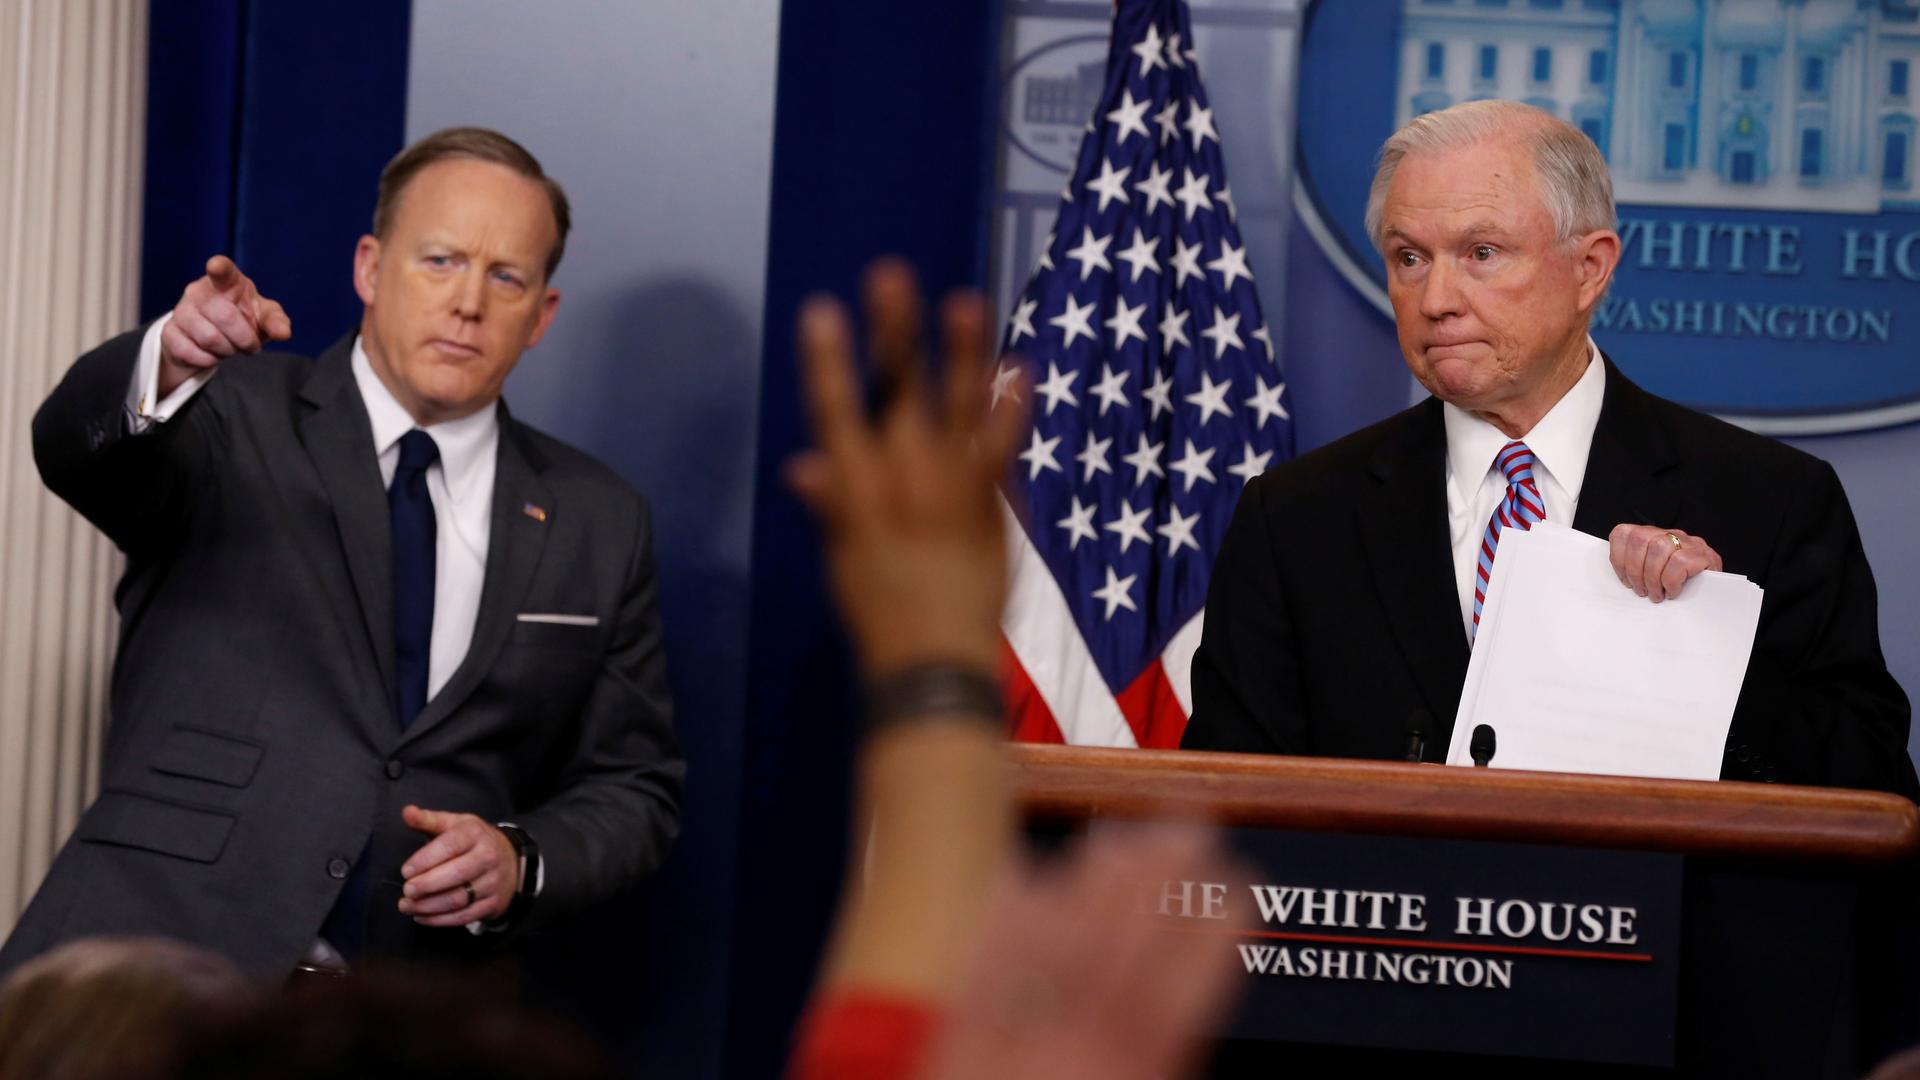 US Attorney General Jeff Sessions, on the right, joined White House Press Secretary Sean Spicer for the daily press briefing on Monday, March 27.